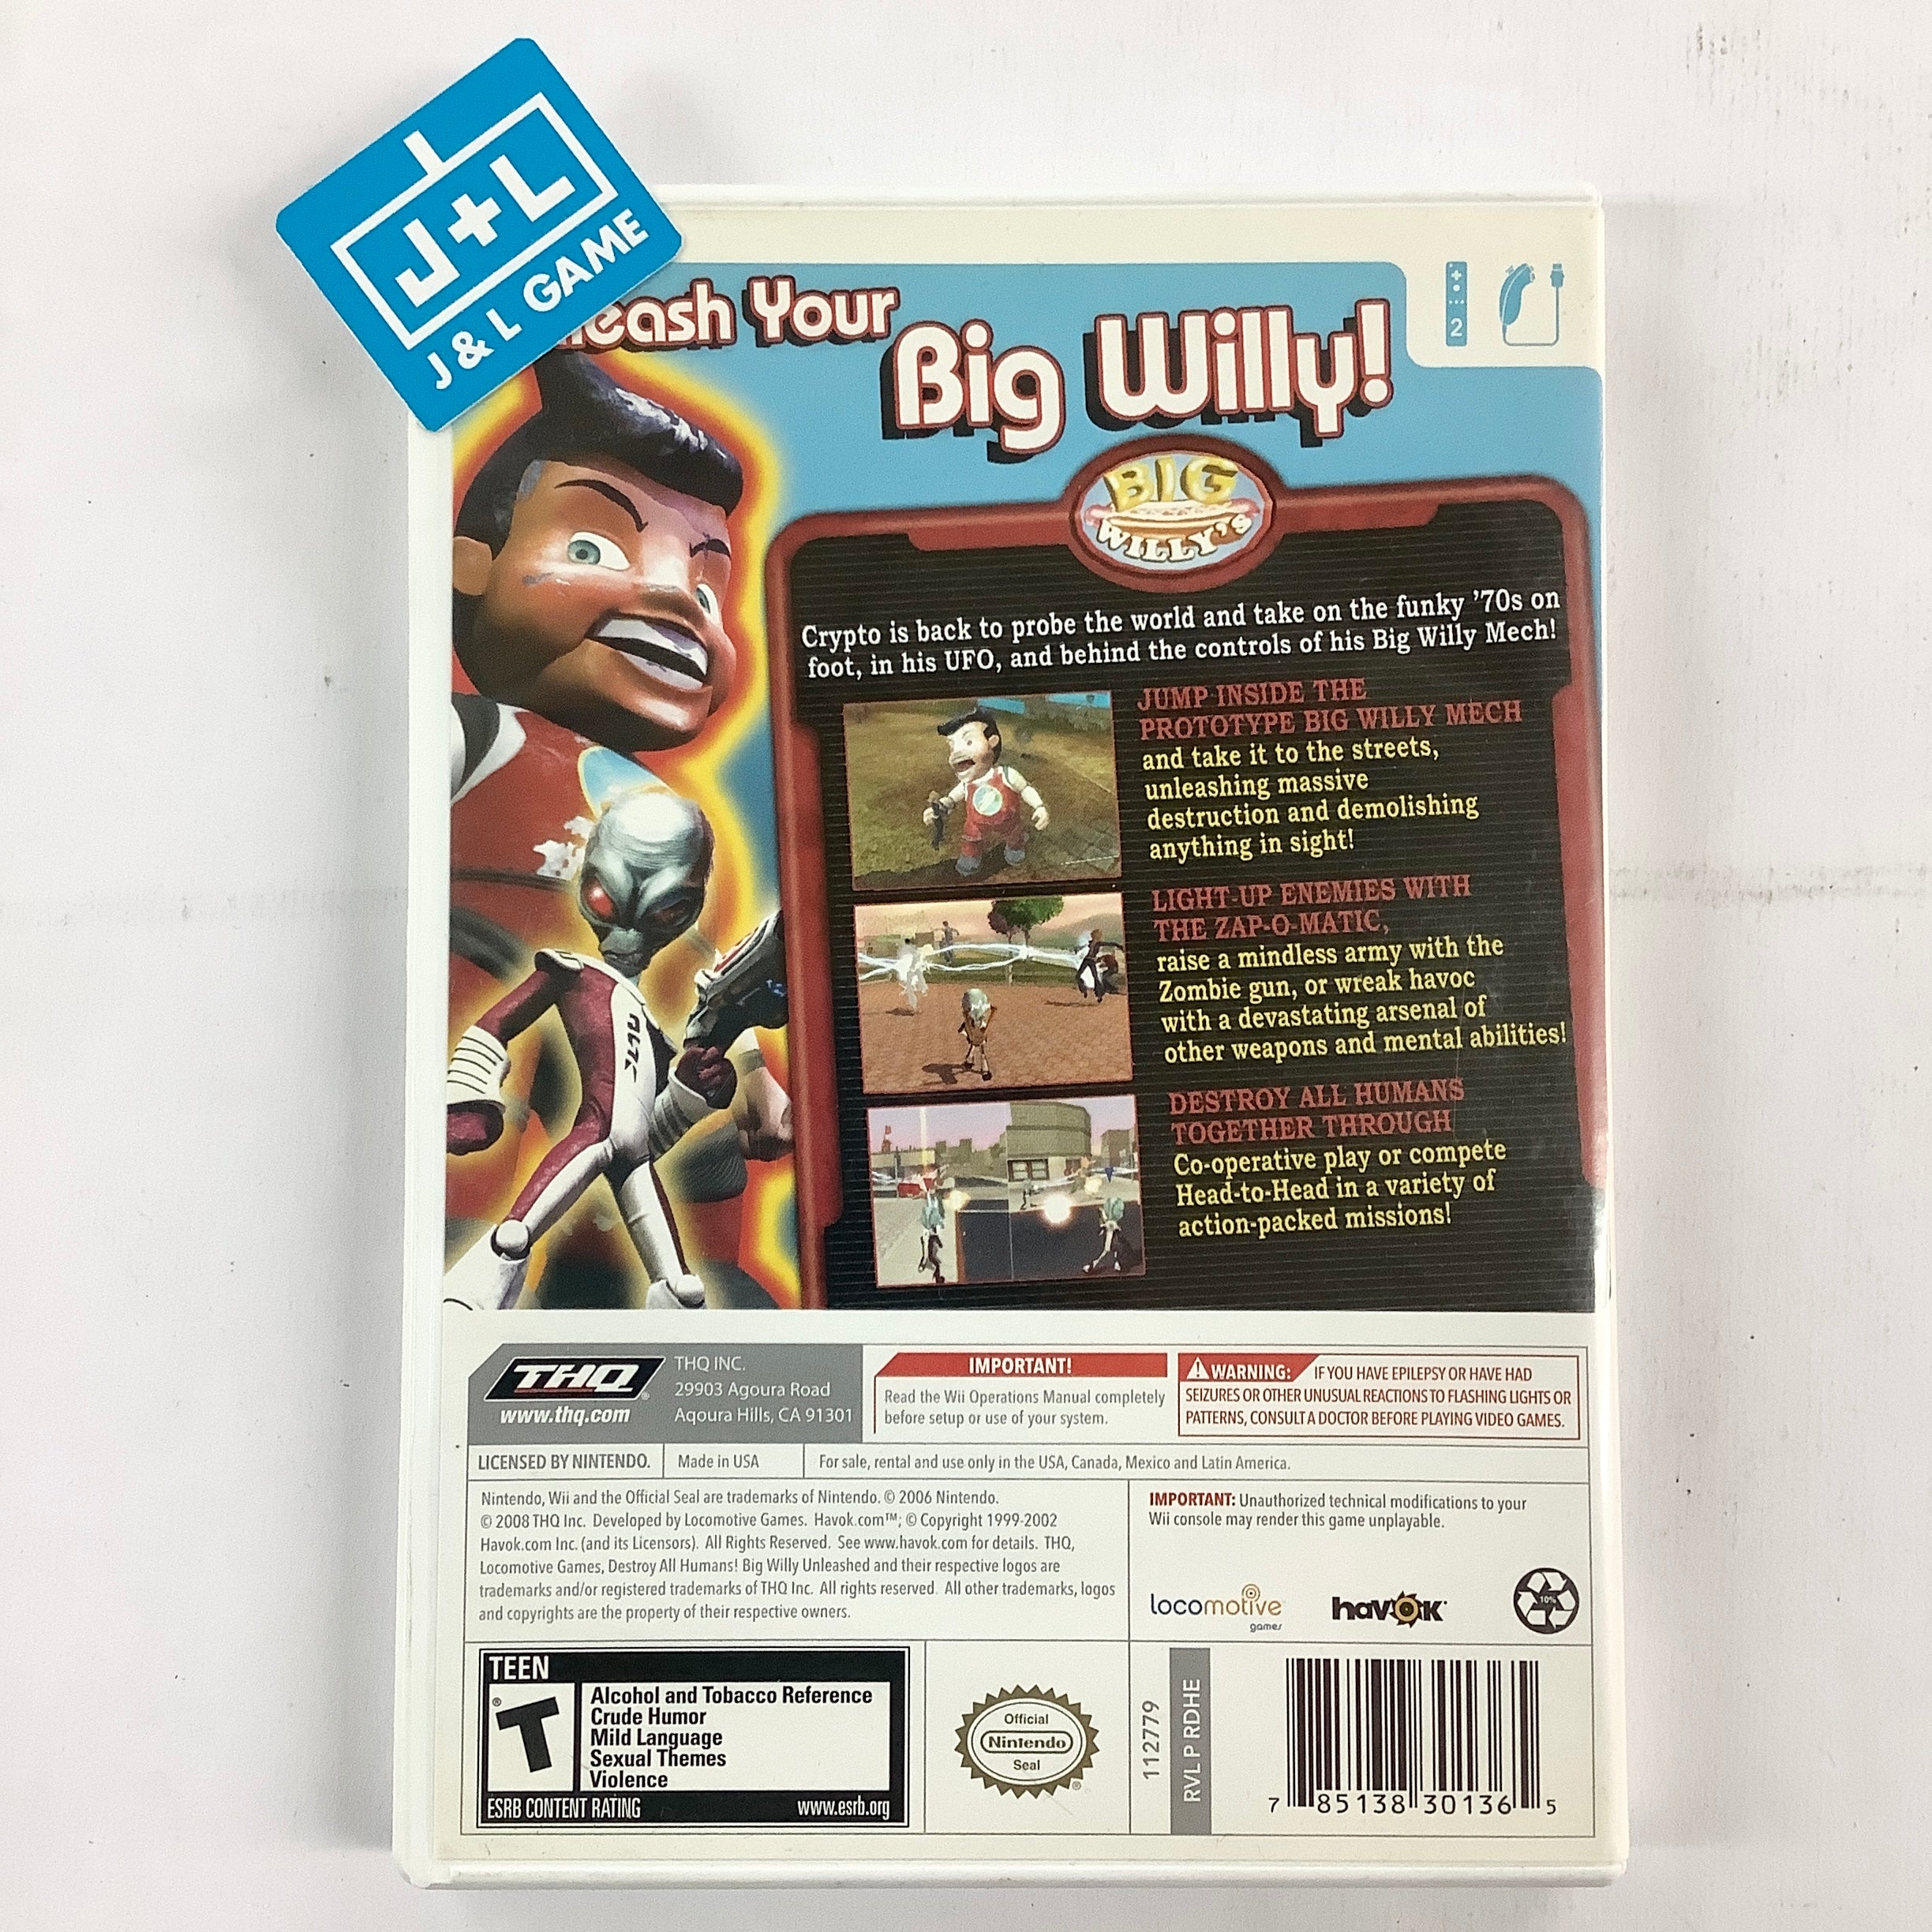 Destroy All Humans! Big Willy Unleashed - Nintendo Wii [Pre-Owned] Video Games THQ   